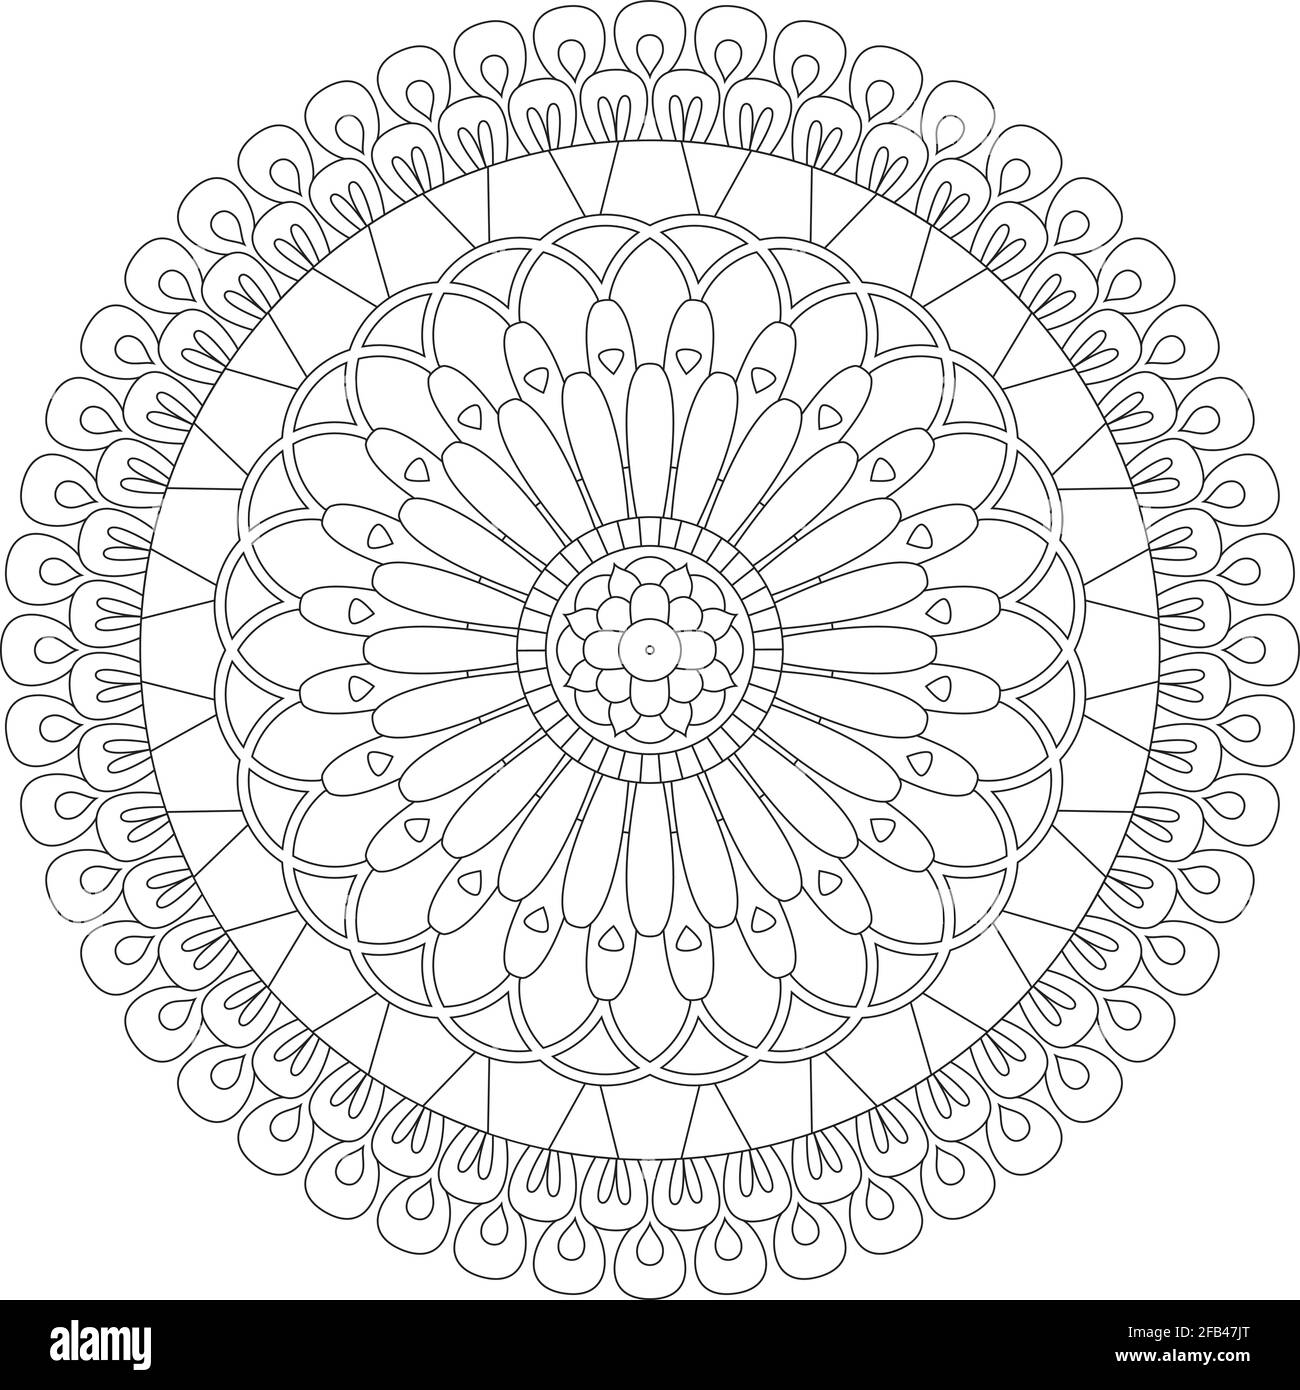 Vector illustration of a decorative floral mandala for coloring isolated on white background. Stock Vector